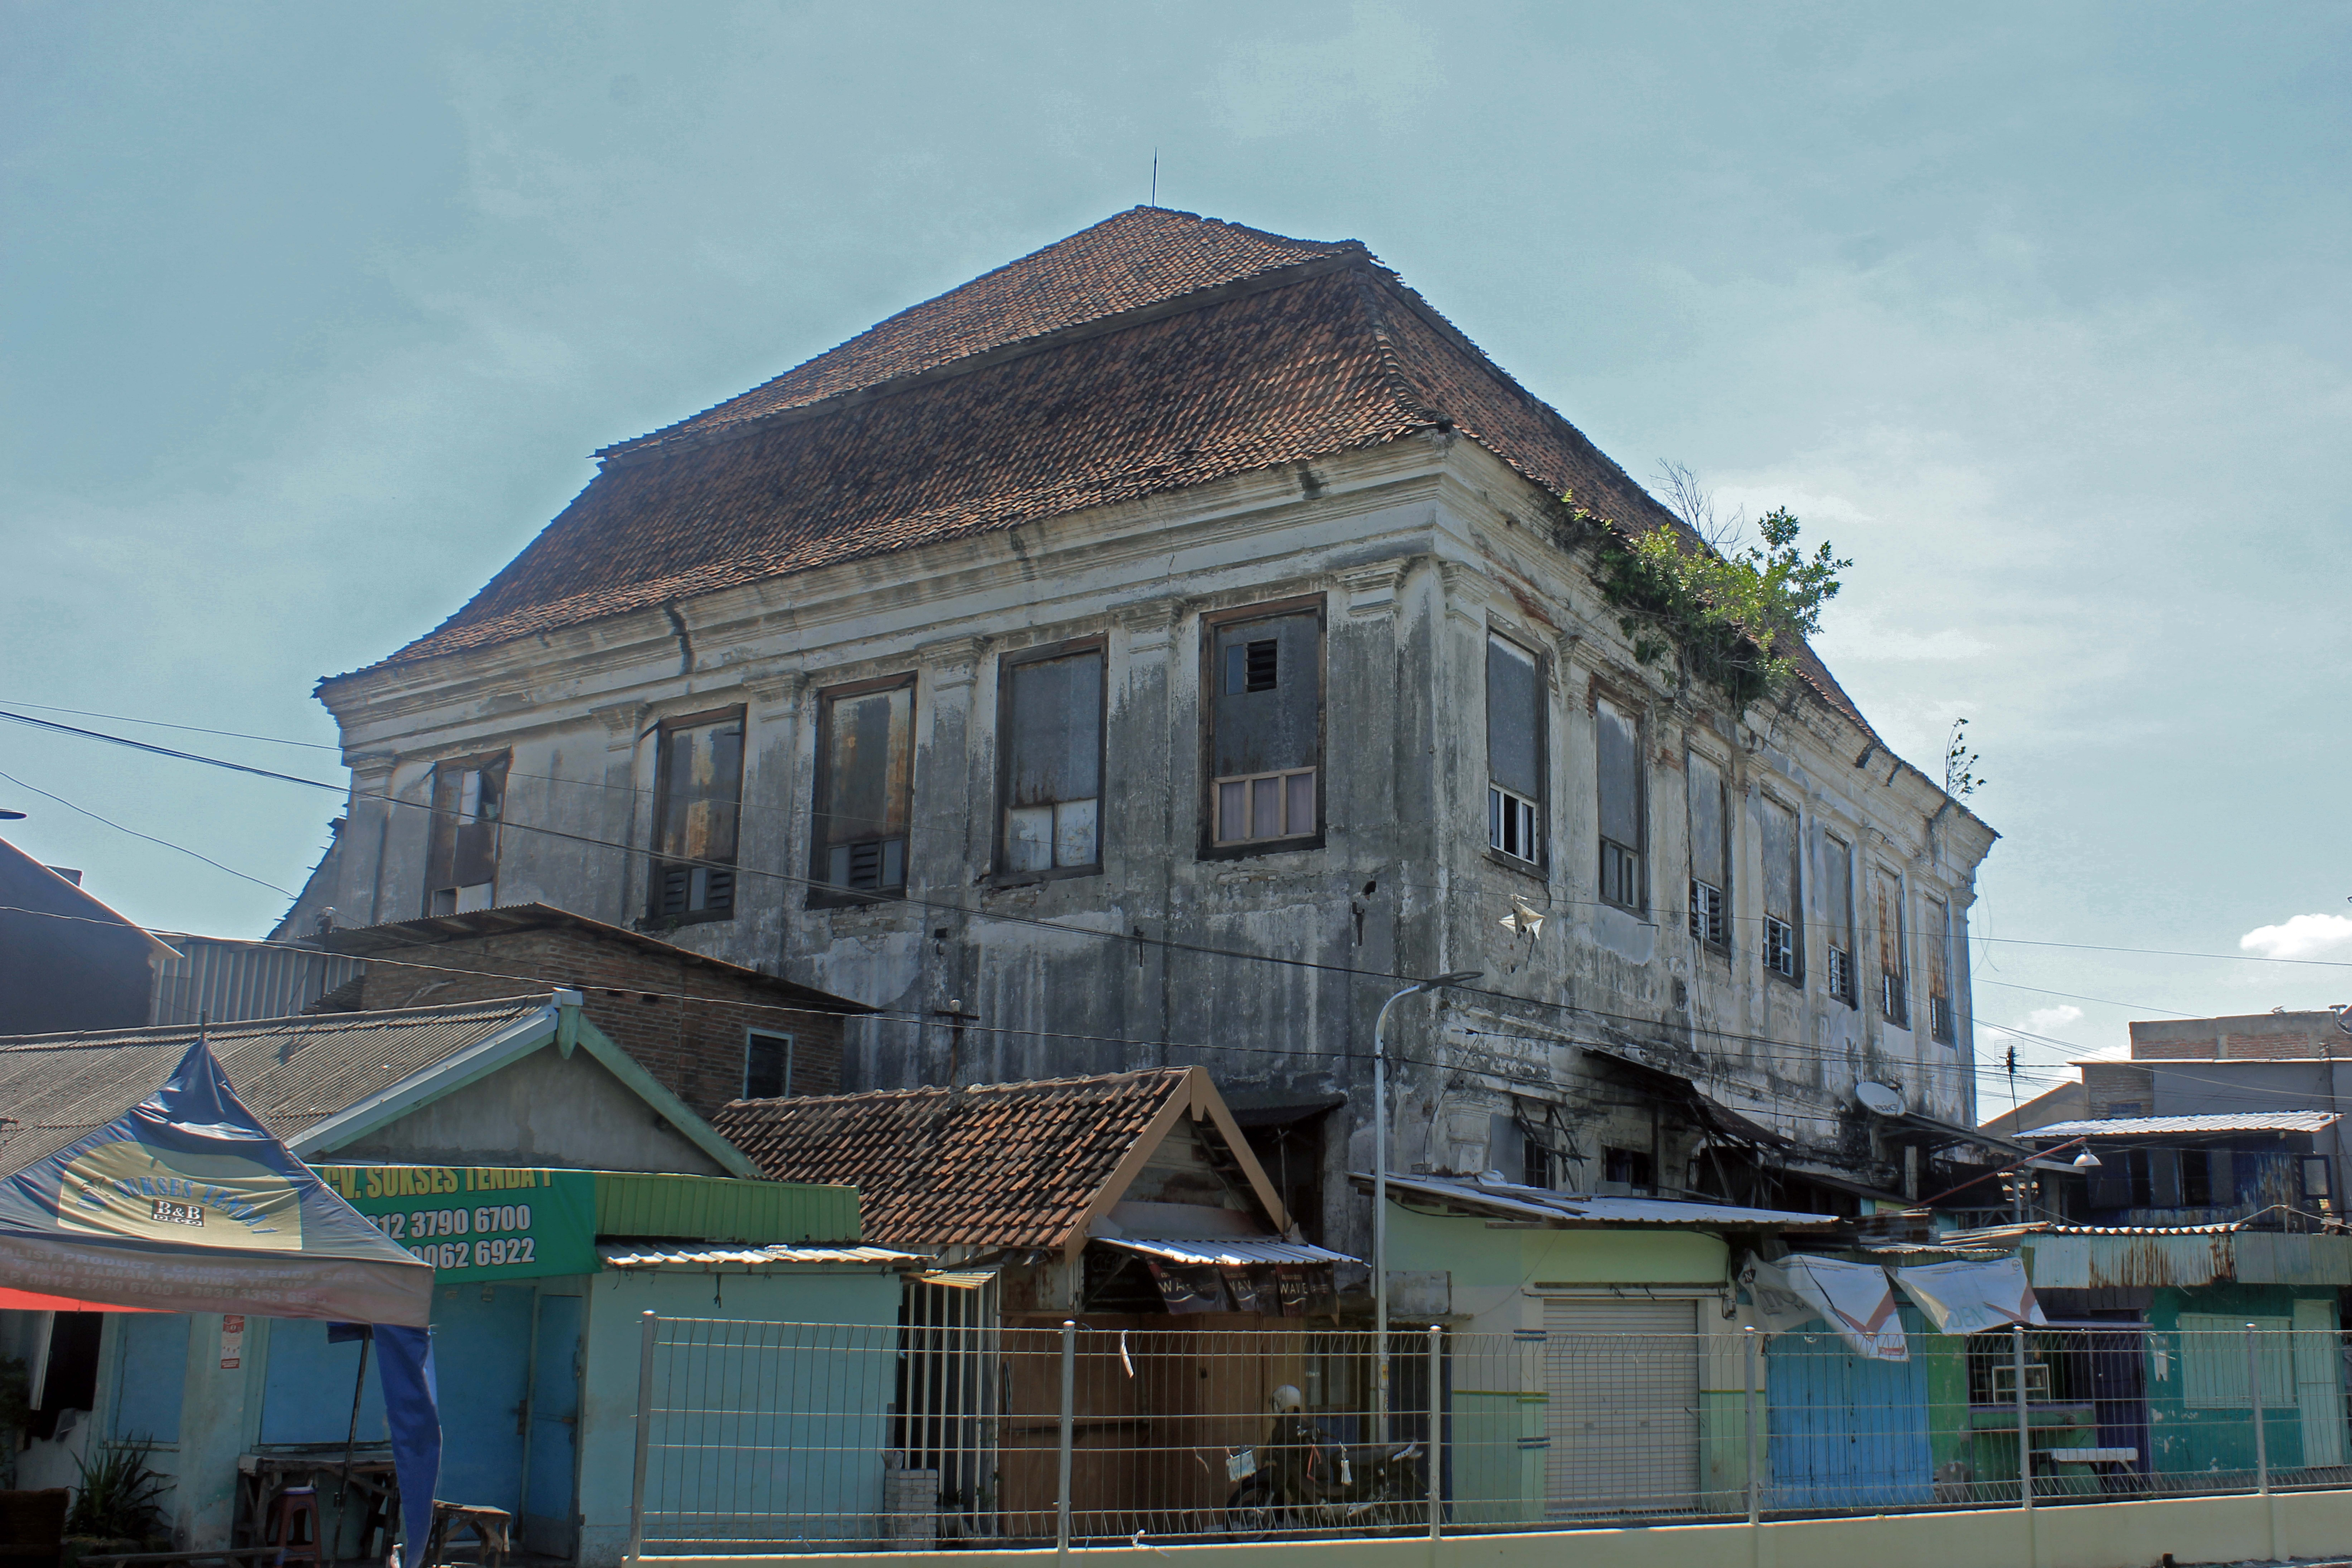 Satan’s Building in Surabaya, said to be haunted because graveyards once surrounded it. Photo: Witness News/Lukman Abdul Rozaq